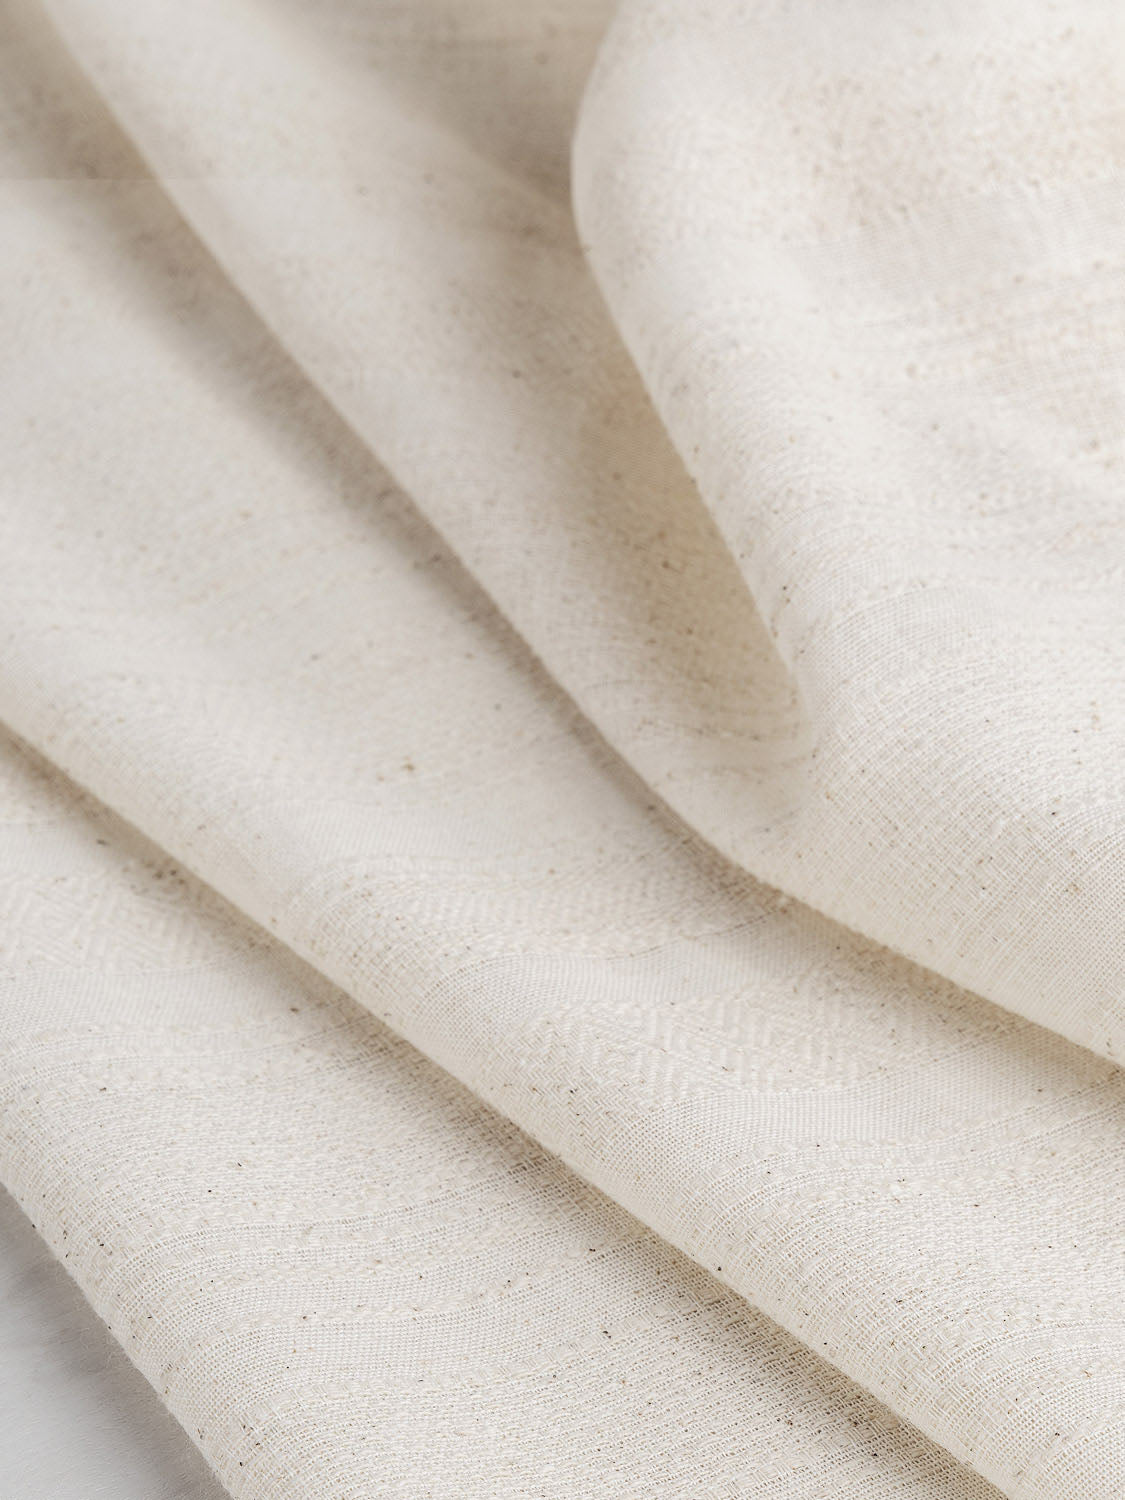 White Pure Soft Cotton by the Yard, kulir Soft Lightweigth 100% Cotton  Fabric for Pajamas, Sportswear, Dresses, T-shirts, Organic Cotton -   Canada